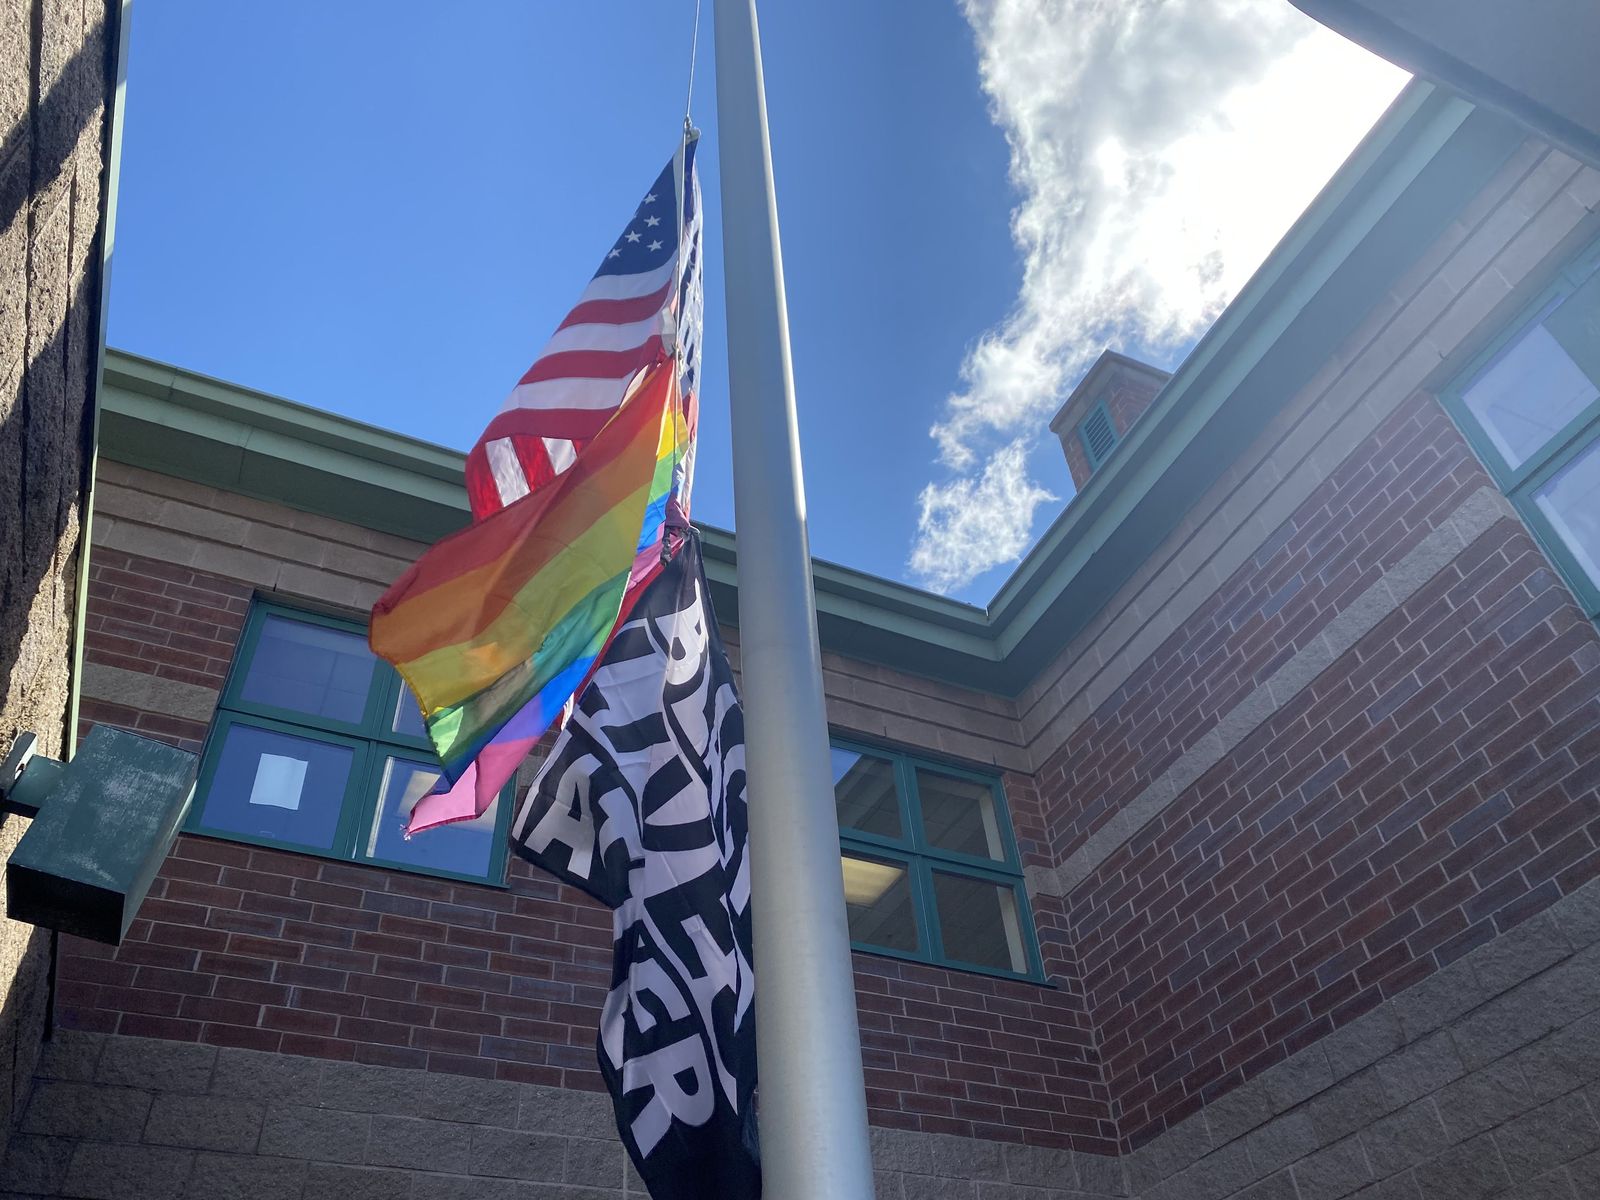 'Being sponsored by the Jesuits does not alone make a school Catholic': Worcester bishop pens second letter demanding Black Catholic school remove BLM, Pride flags